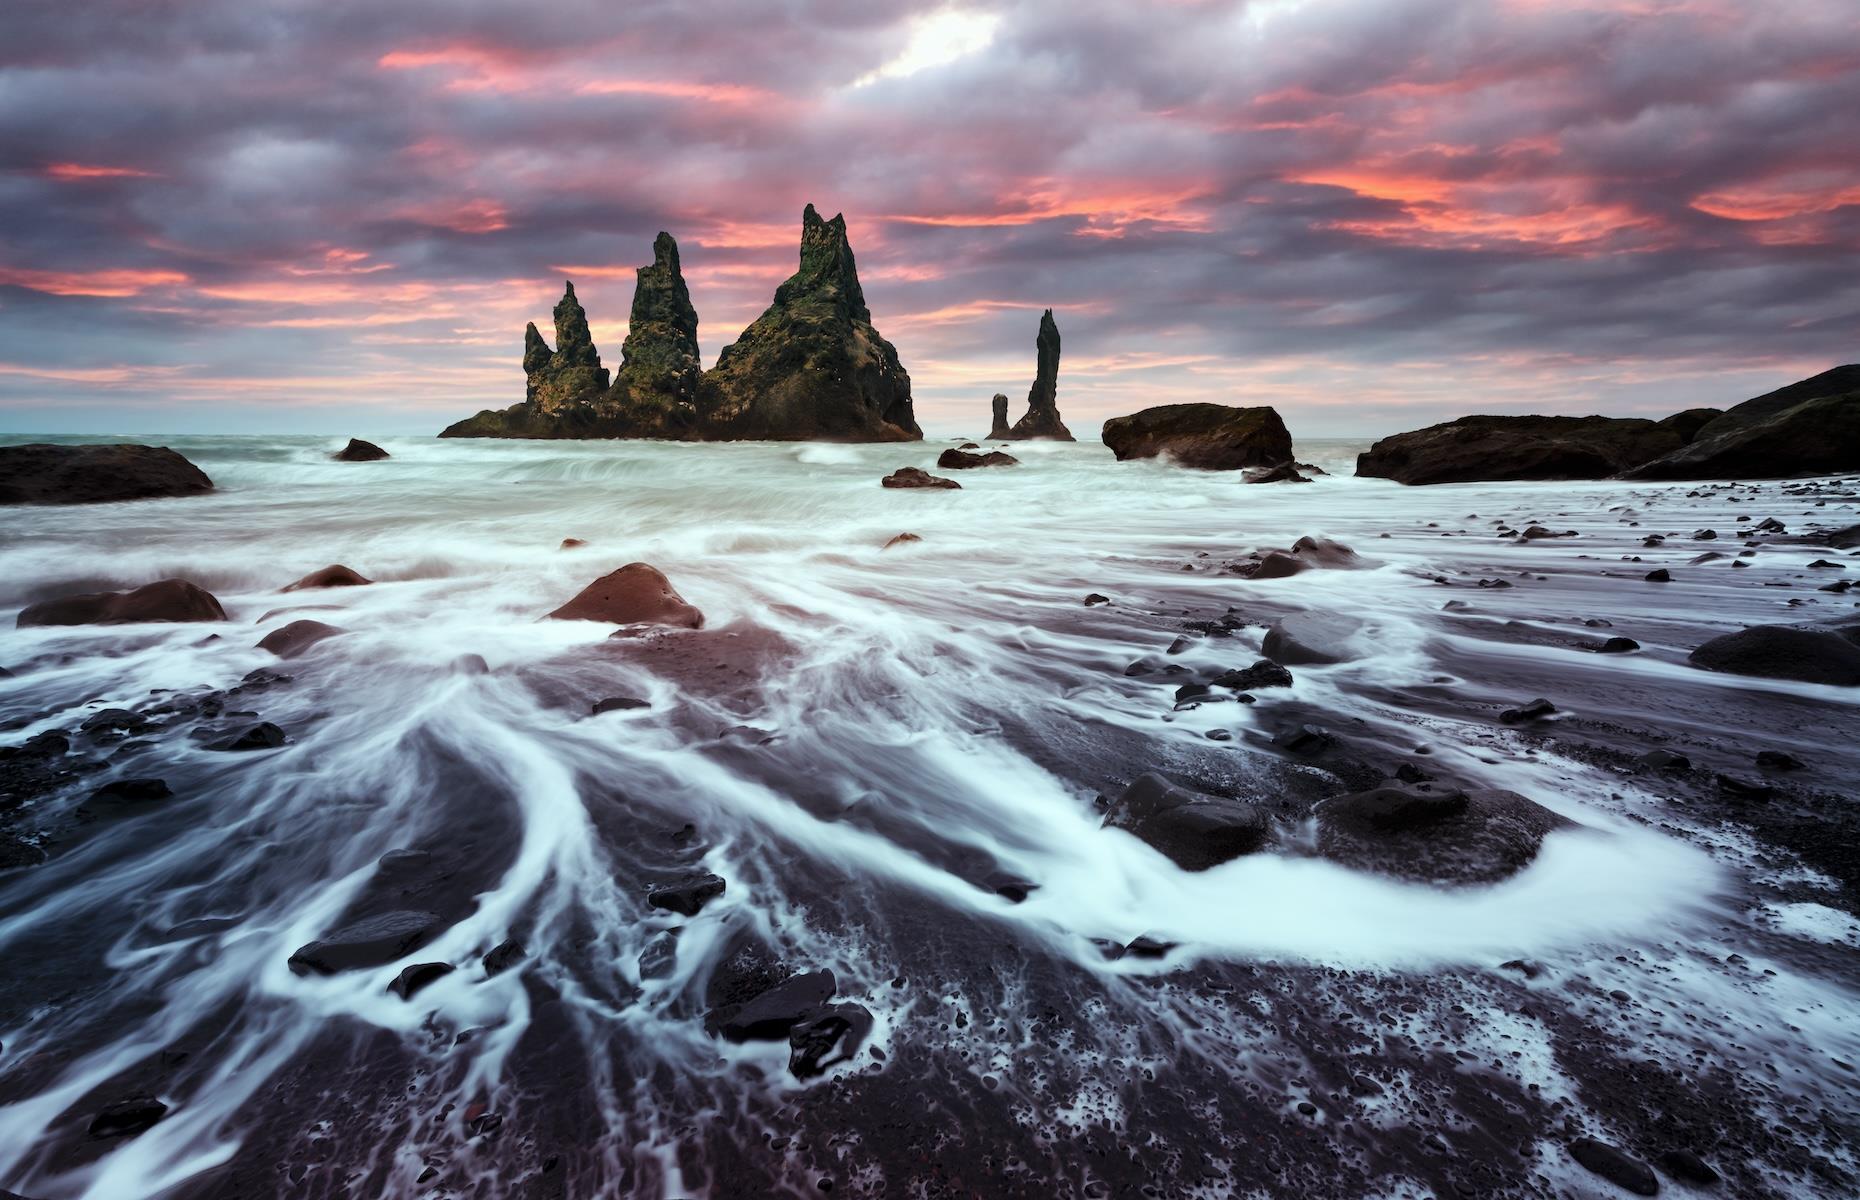 <p>Another otherworldly landscape in northern Europe, Iceland’s famous black beach, Reynisfjara, lures visitors with its bleak and bewitching beauty. As well as its raven-black sand, there are perfectly hexagonal basalt columns, smooth pebbles and jagged wave-pounded sea stacks at this beauty spot on the country’s unprotected south coast, where the North Atlantic crashes in. People come to revel in the moodiness of the seascape as well as to spot the seabirds including puffins, fulmars and guillemots that nest on the unsupervised beach's sea stacks and cliffs.</p>